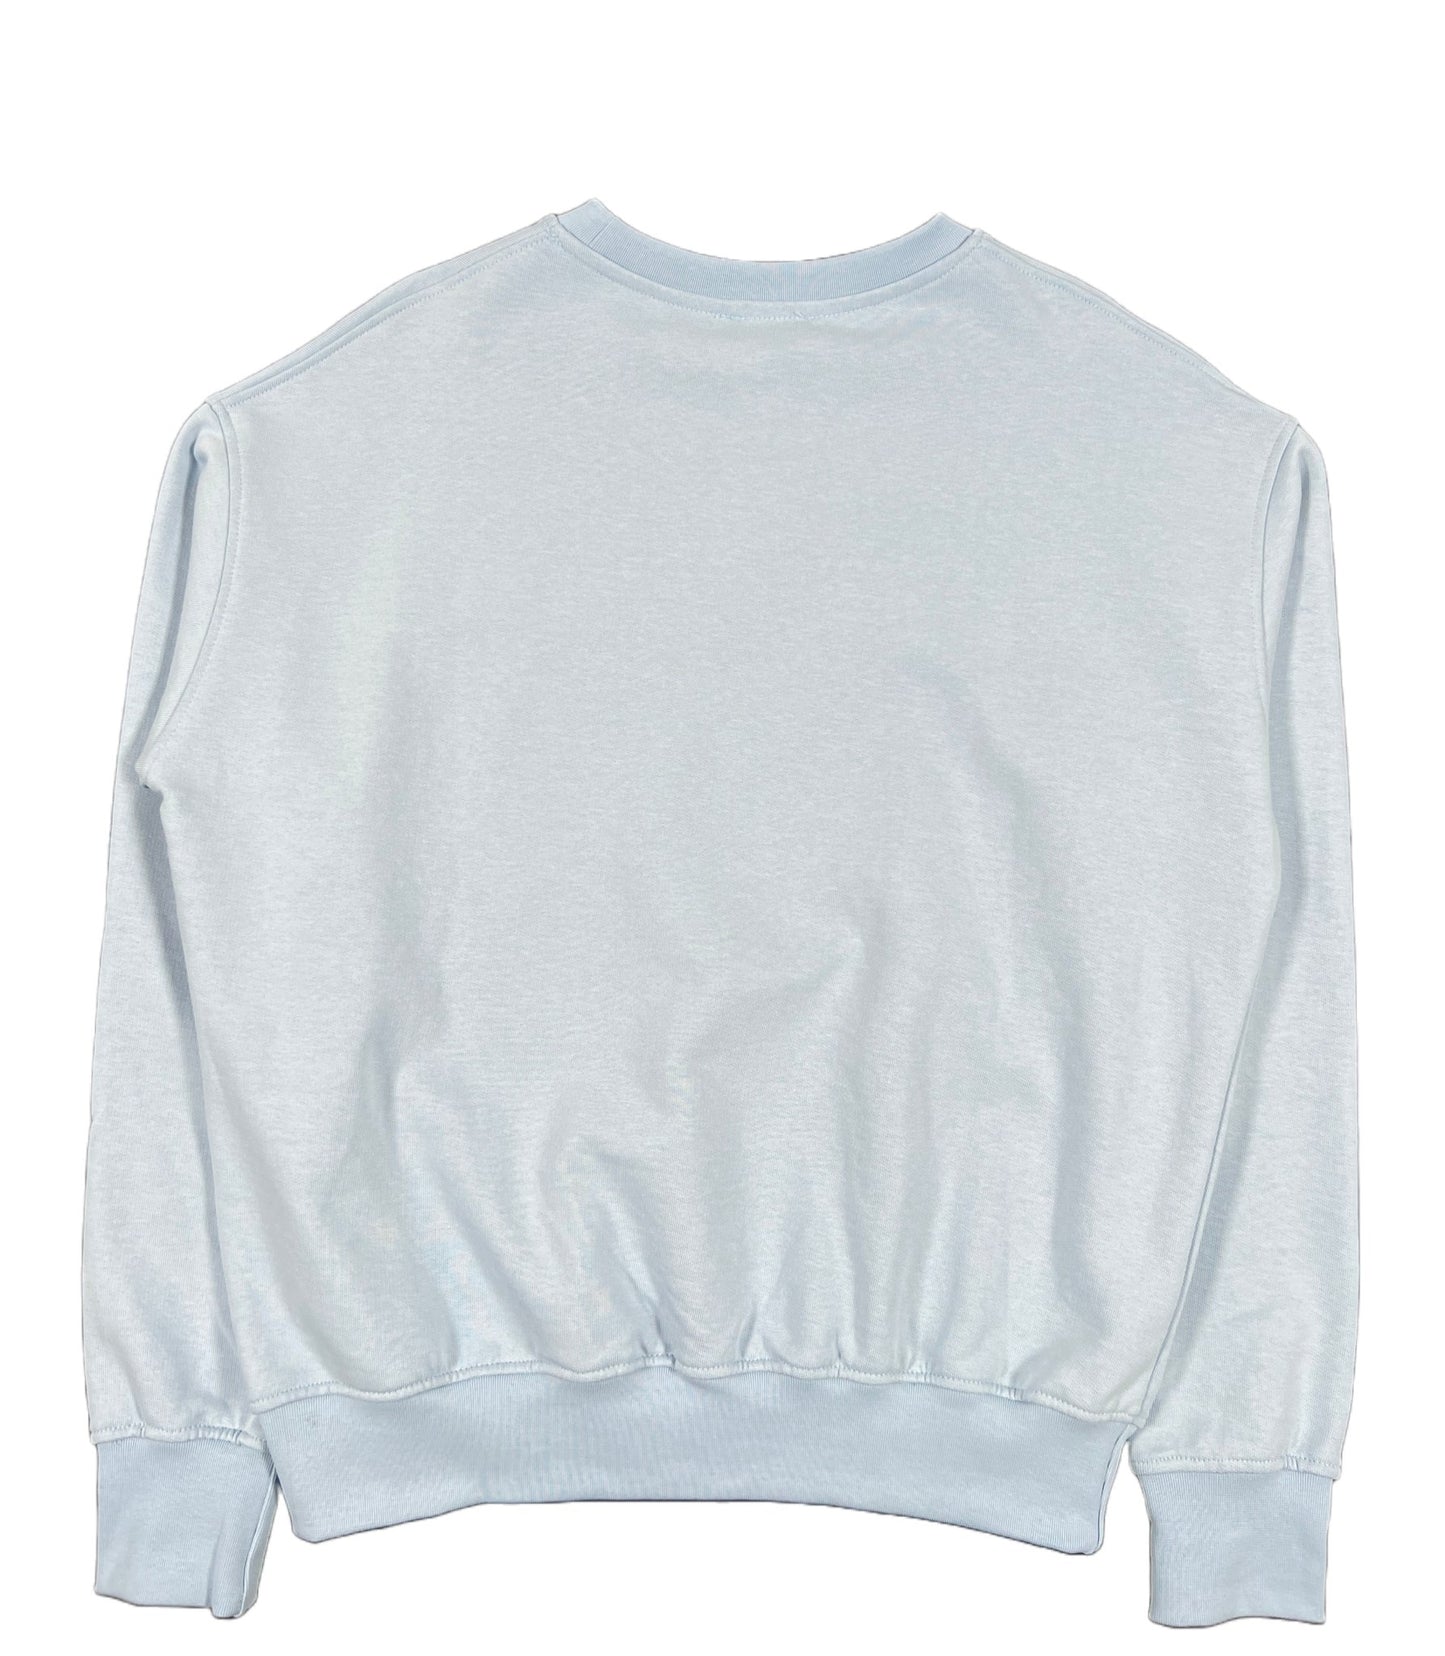 The back view of a FAMILY FIRST SS2307 CREWNECK BUGS LIGHT BLUE sweatshirt.